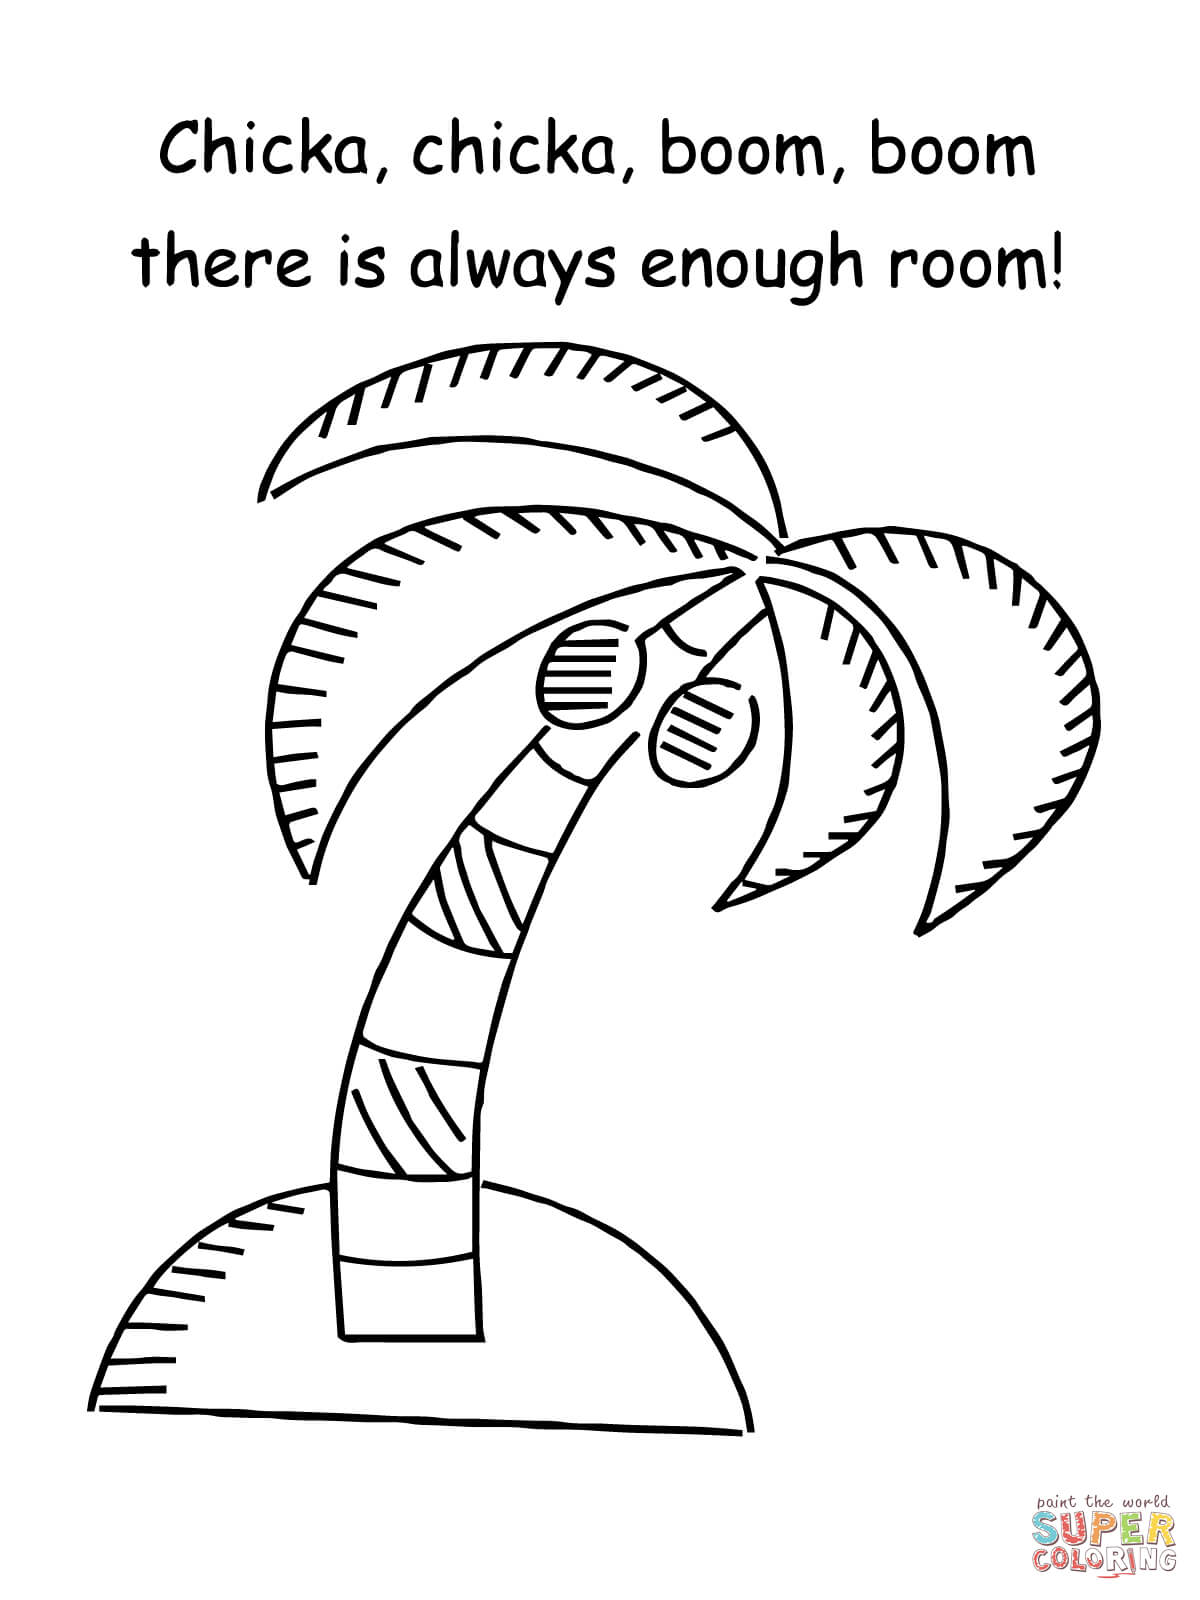 Chicka Chicka Boom Boom There is Always Enough Room coloring page